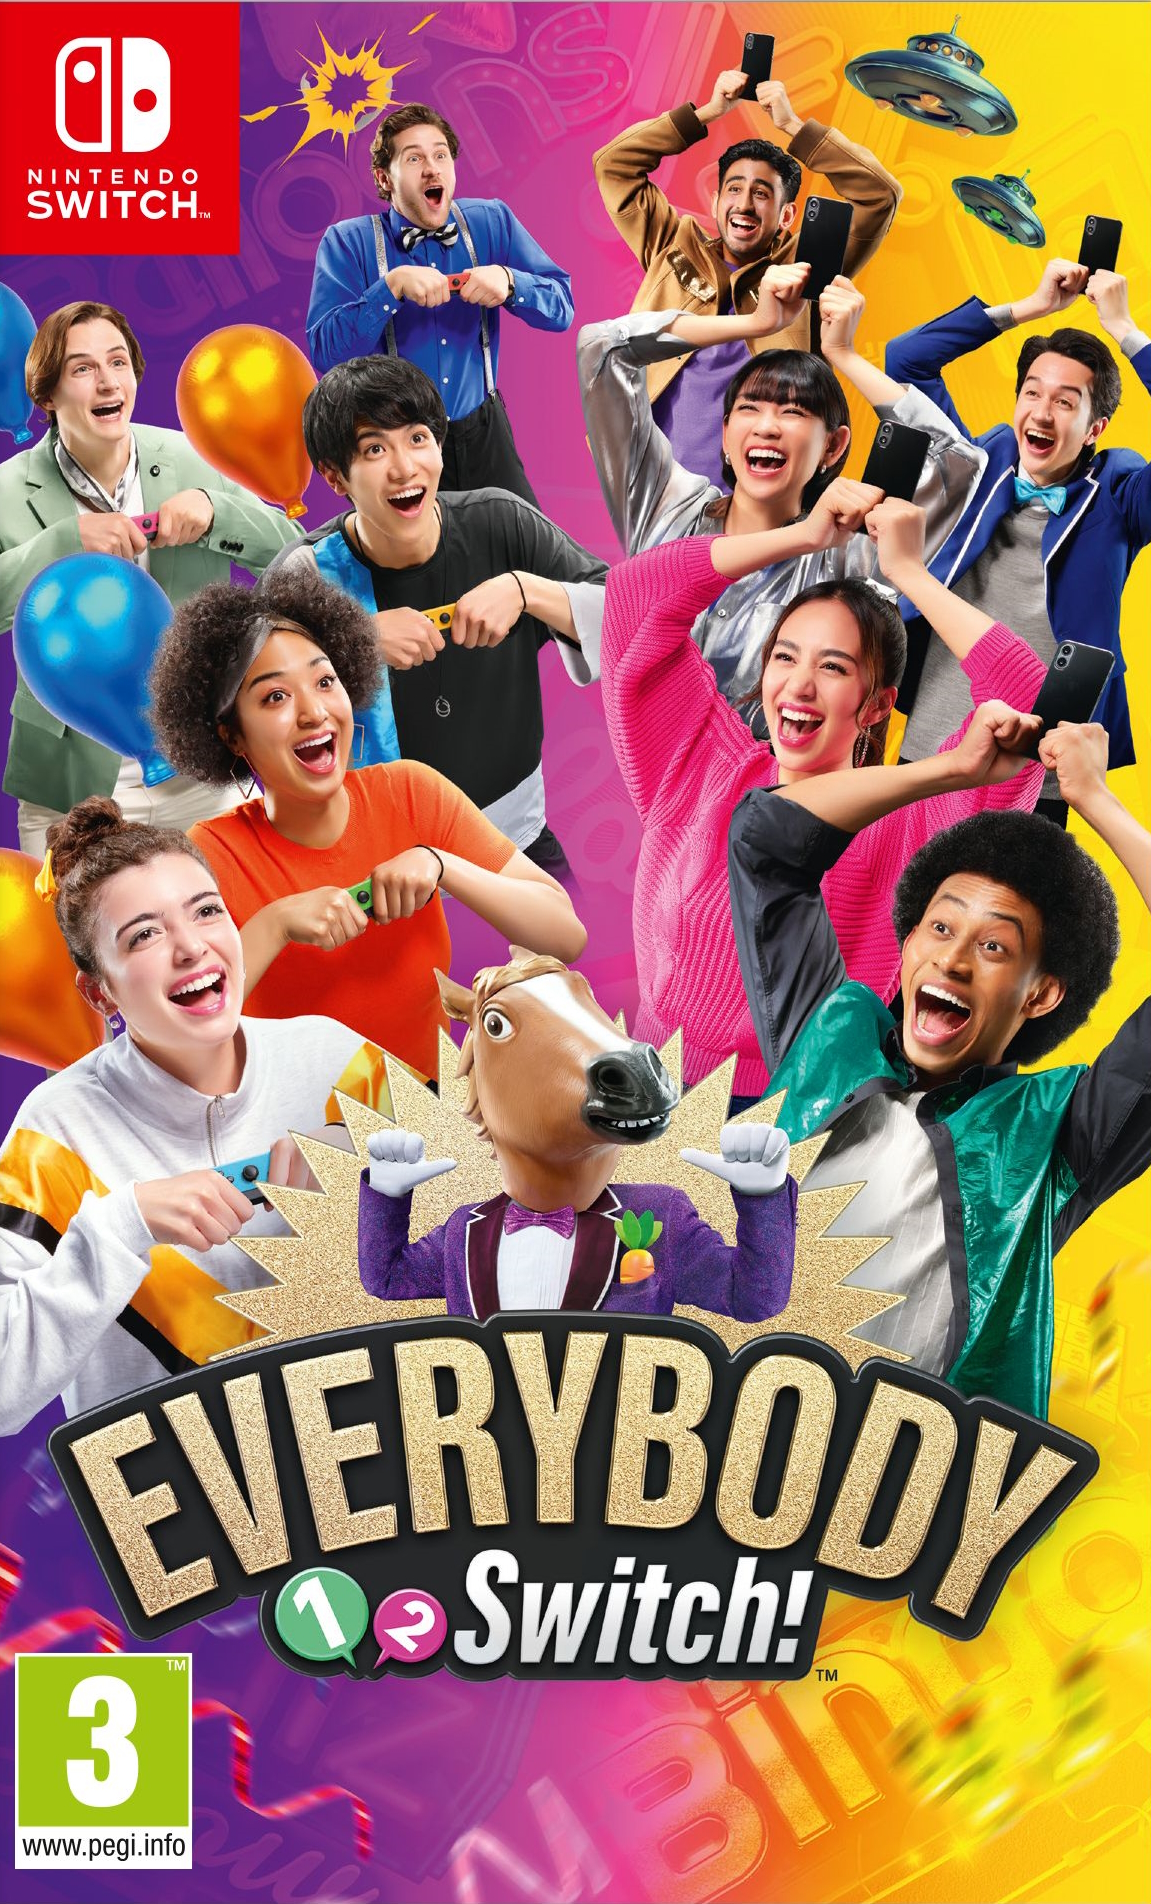 jaquette reduite de Everybody 1-2 Switch sur Switch